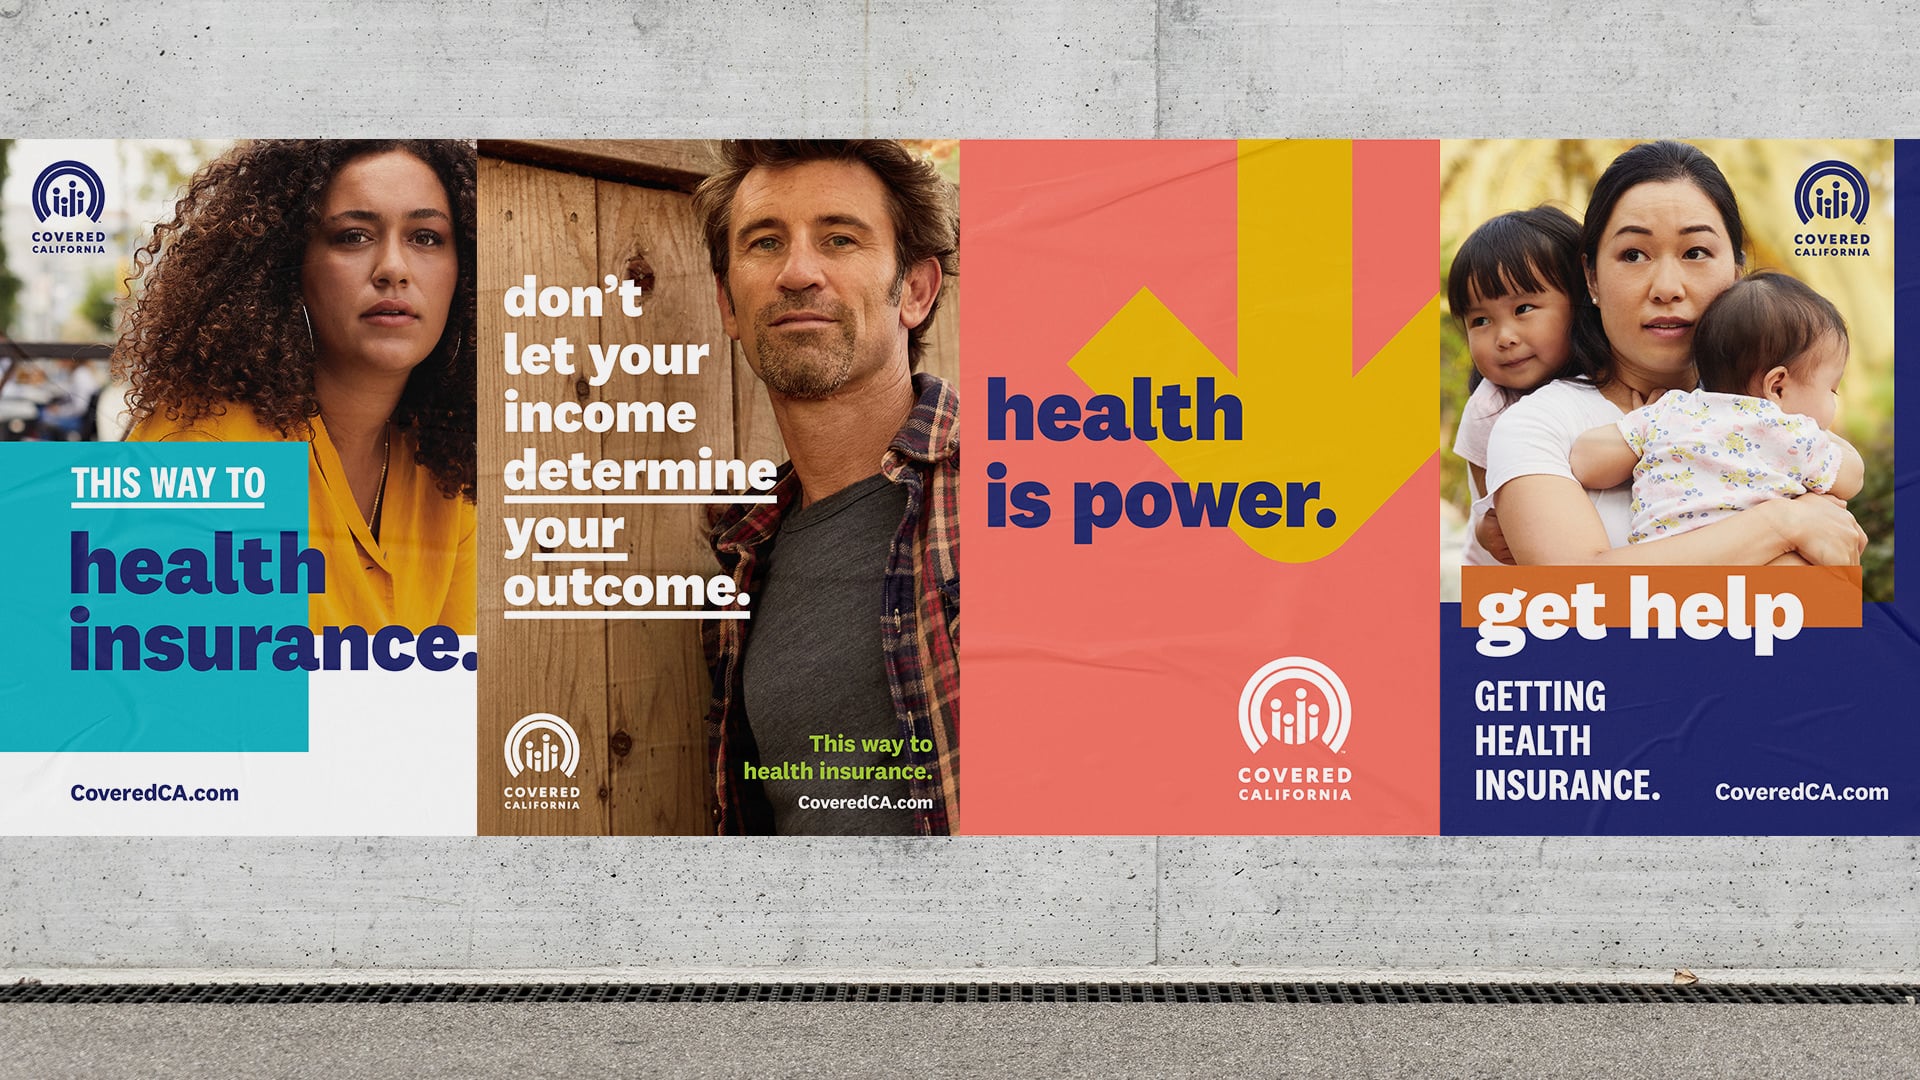 4 posters on a cement wall. Left to right: 1) female-presenting person with long curly brown hair wearing yellow shirt. Text reads "This way to health insurance." 2) Male-presenting person with short brown hair and whisker scruff, text reads "don't let your income determine your outcome." 3) Pink and yellow graphic with arrow that reads "health is power." 4) Female-presenting person holding two children. Text reads "get help getting health insurance." The Covered California logo appears throughout.